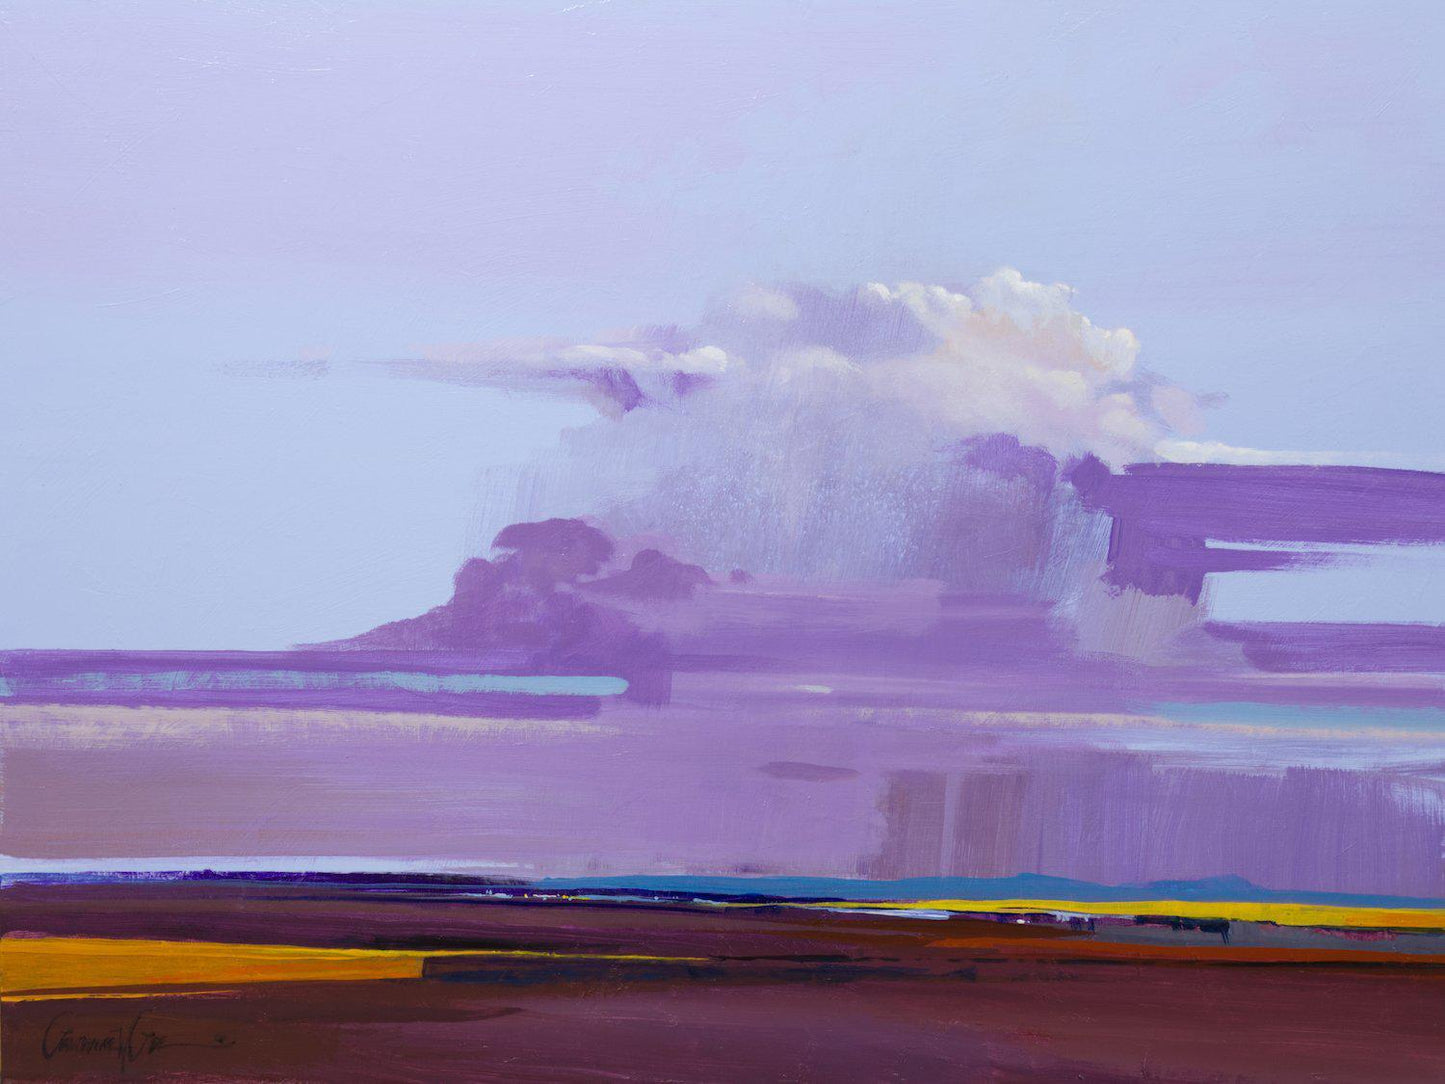 Early Summer Storm-Painting-Lawrence Lee-Sorrel Sky Gallery